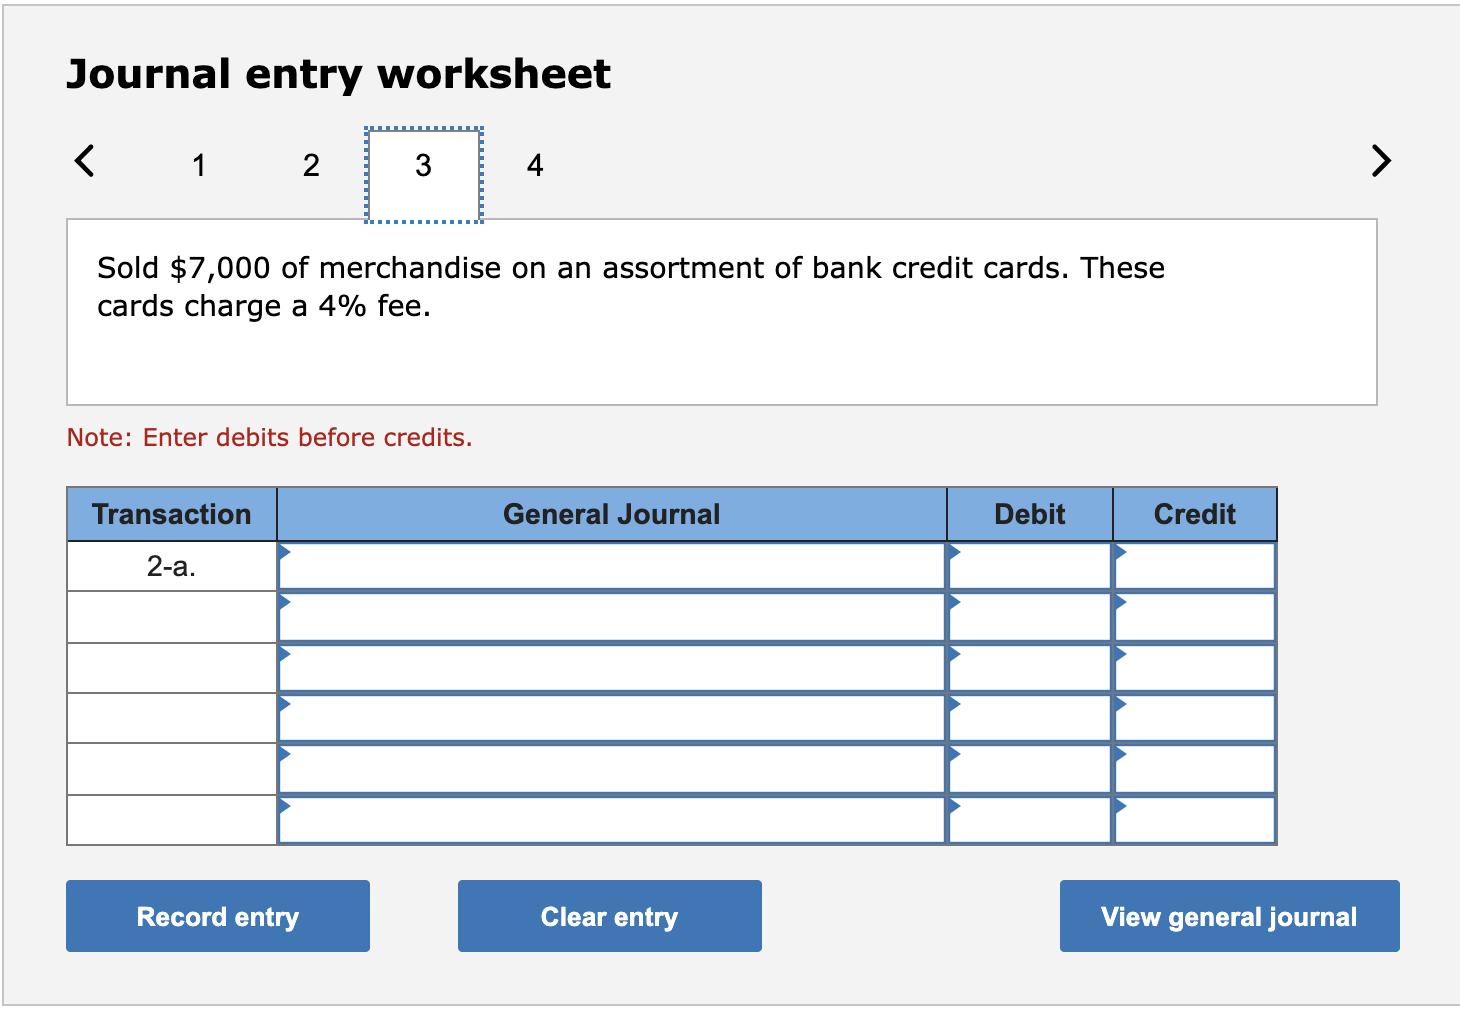 Journal entry worksheet< 12 34 Sold $7,000 of merchandise on an assortment of bank credit cards. These cards charge a 4% f